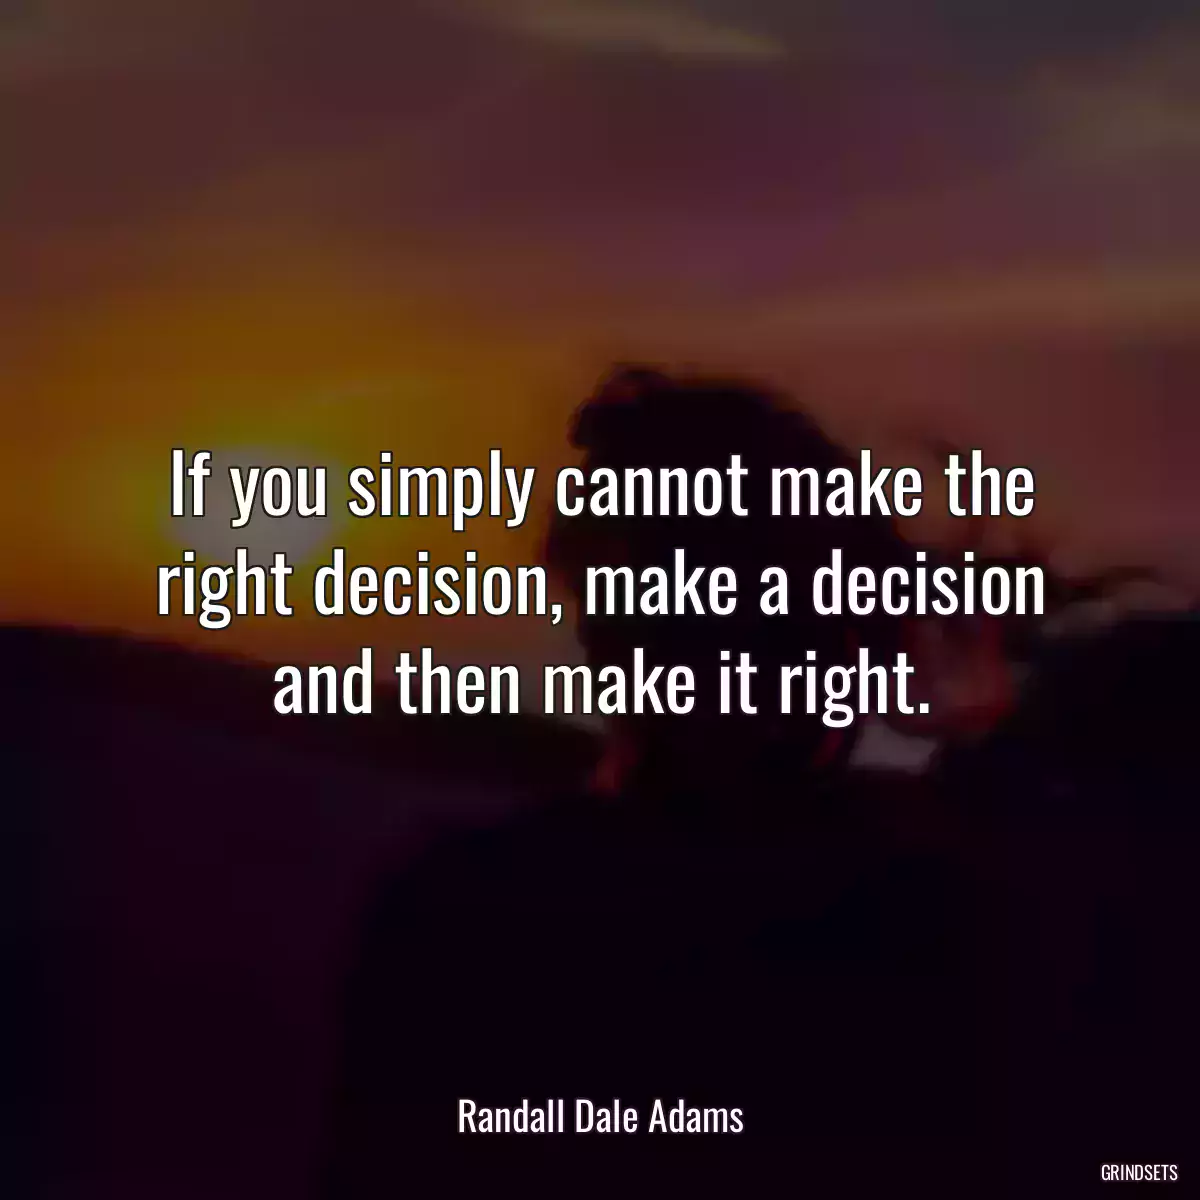 If you simply cannot make the right decision, make a decision and then make it right.